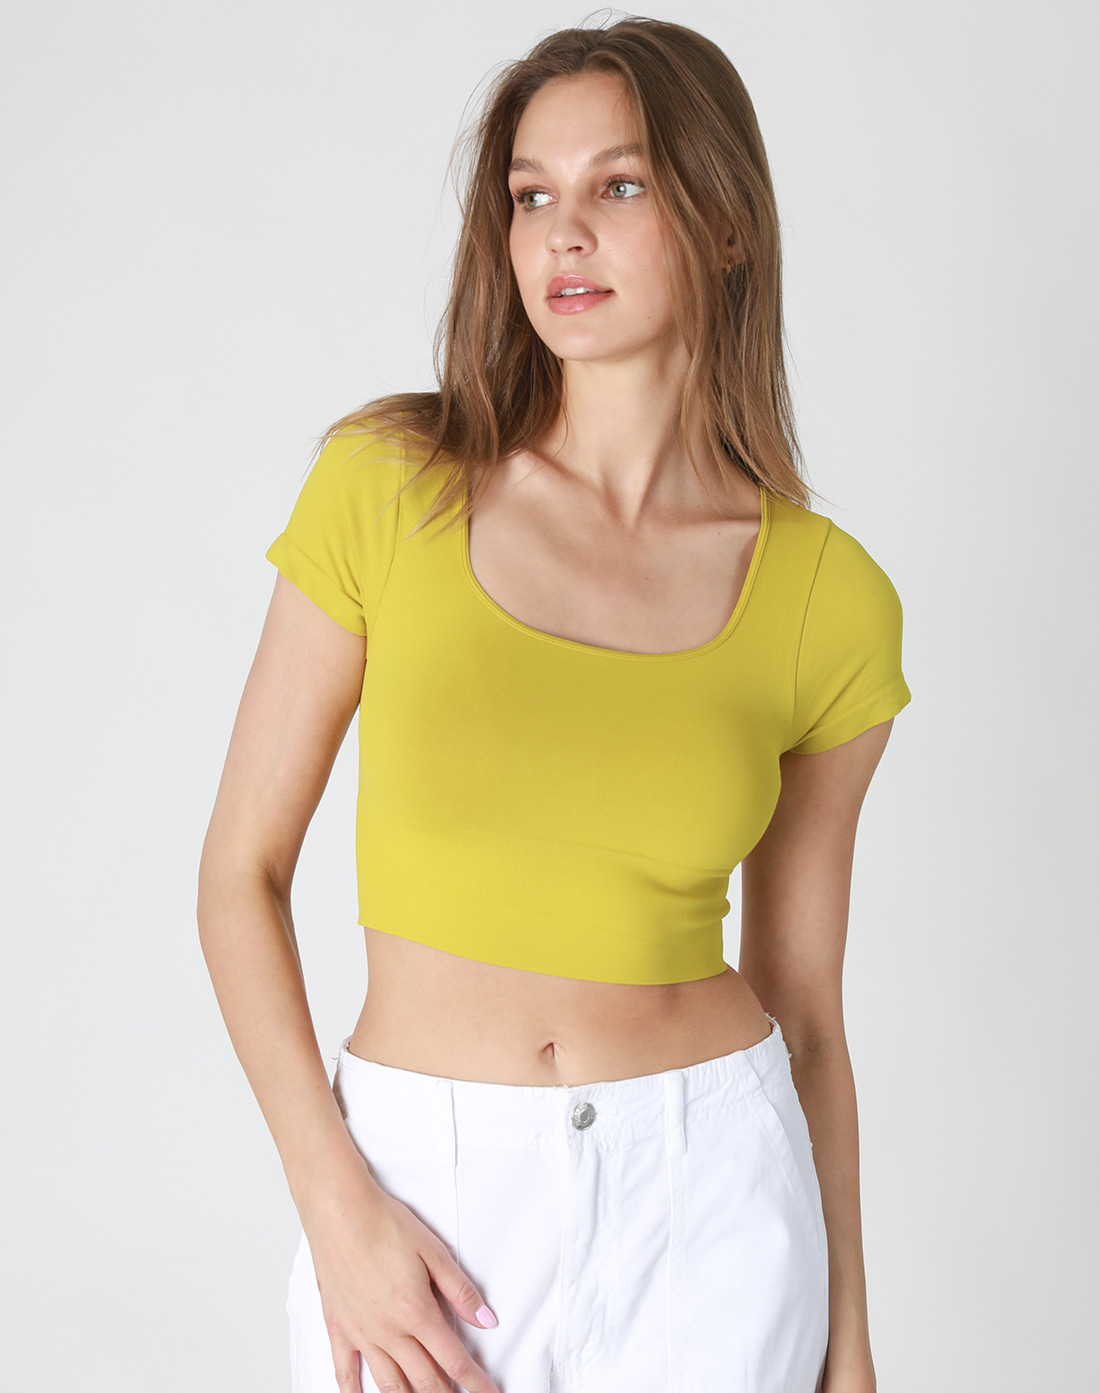 Cap Sleeve Square Neck Top (VN4TS300)